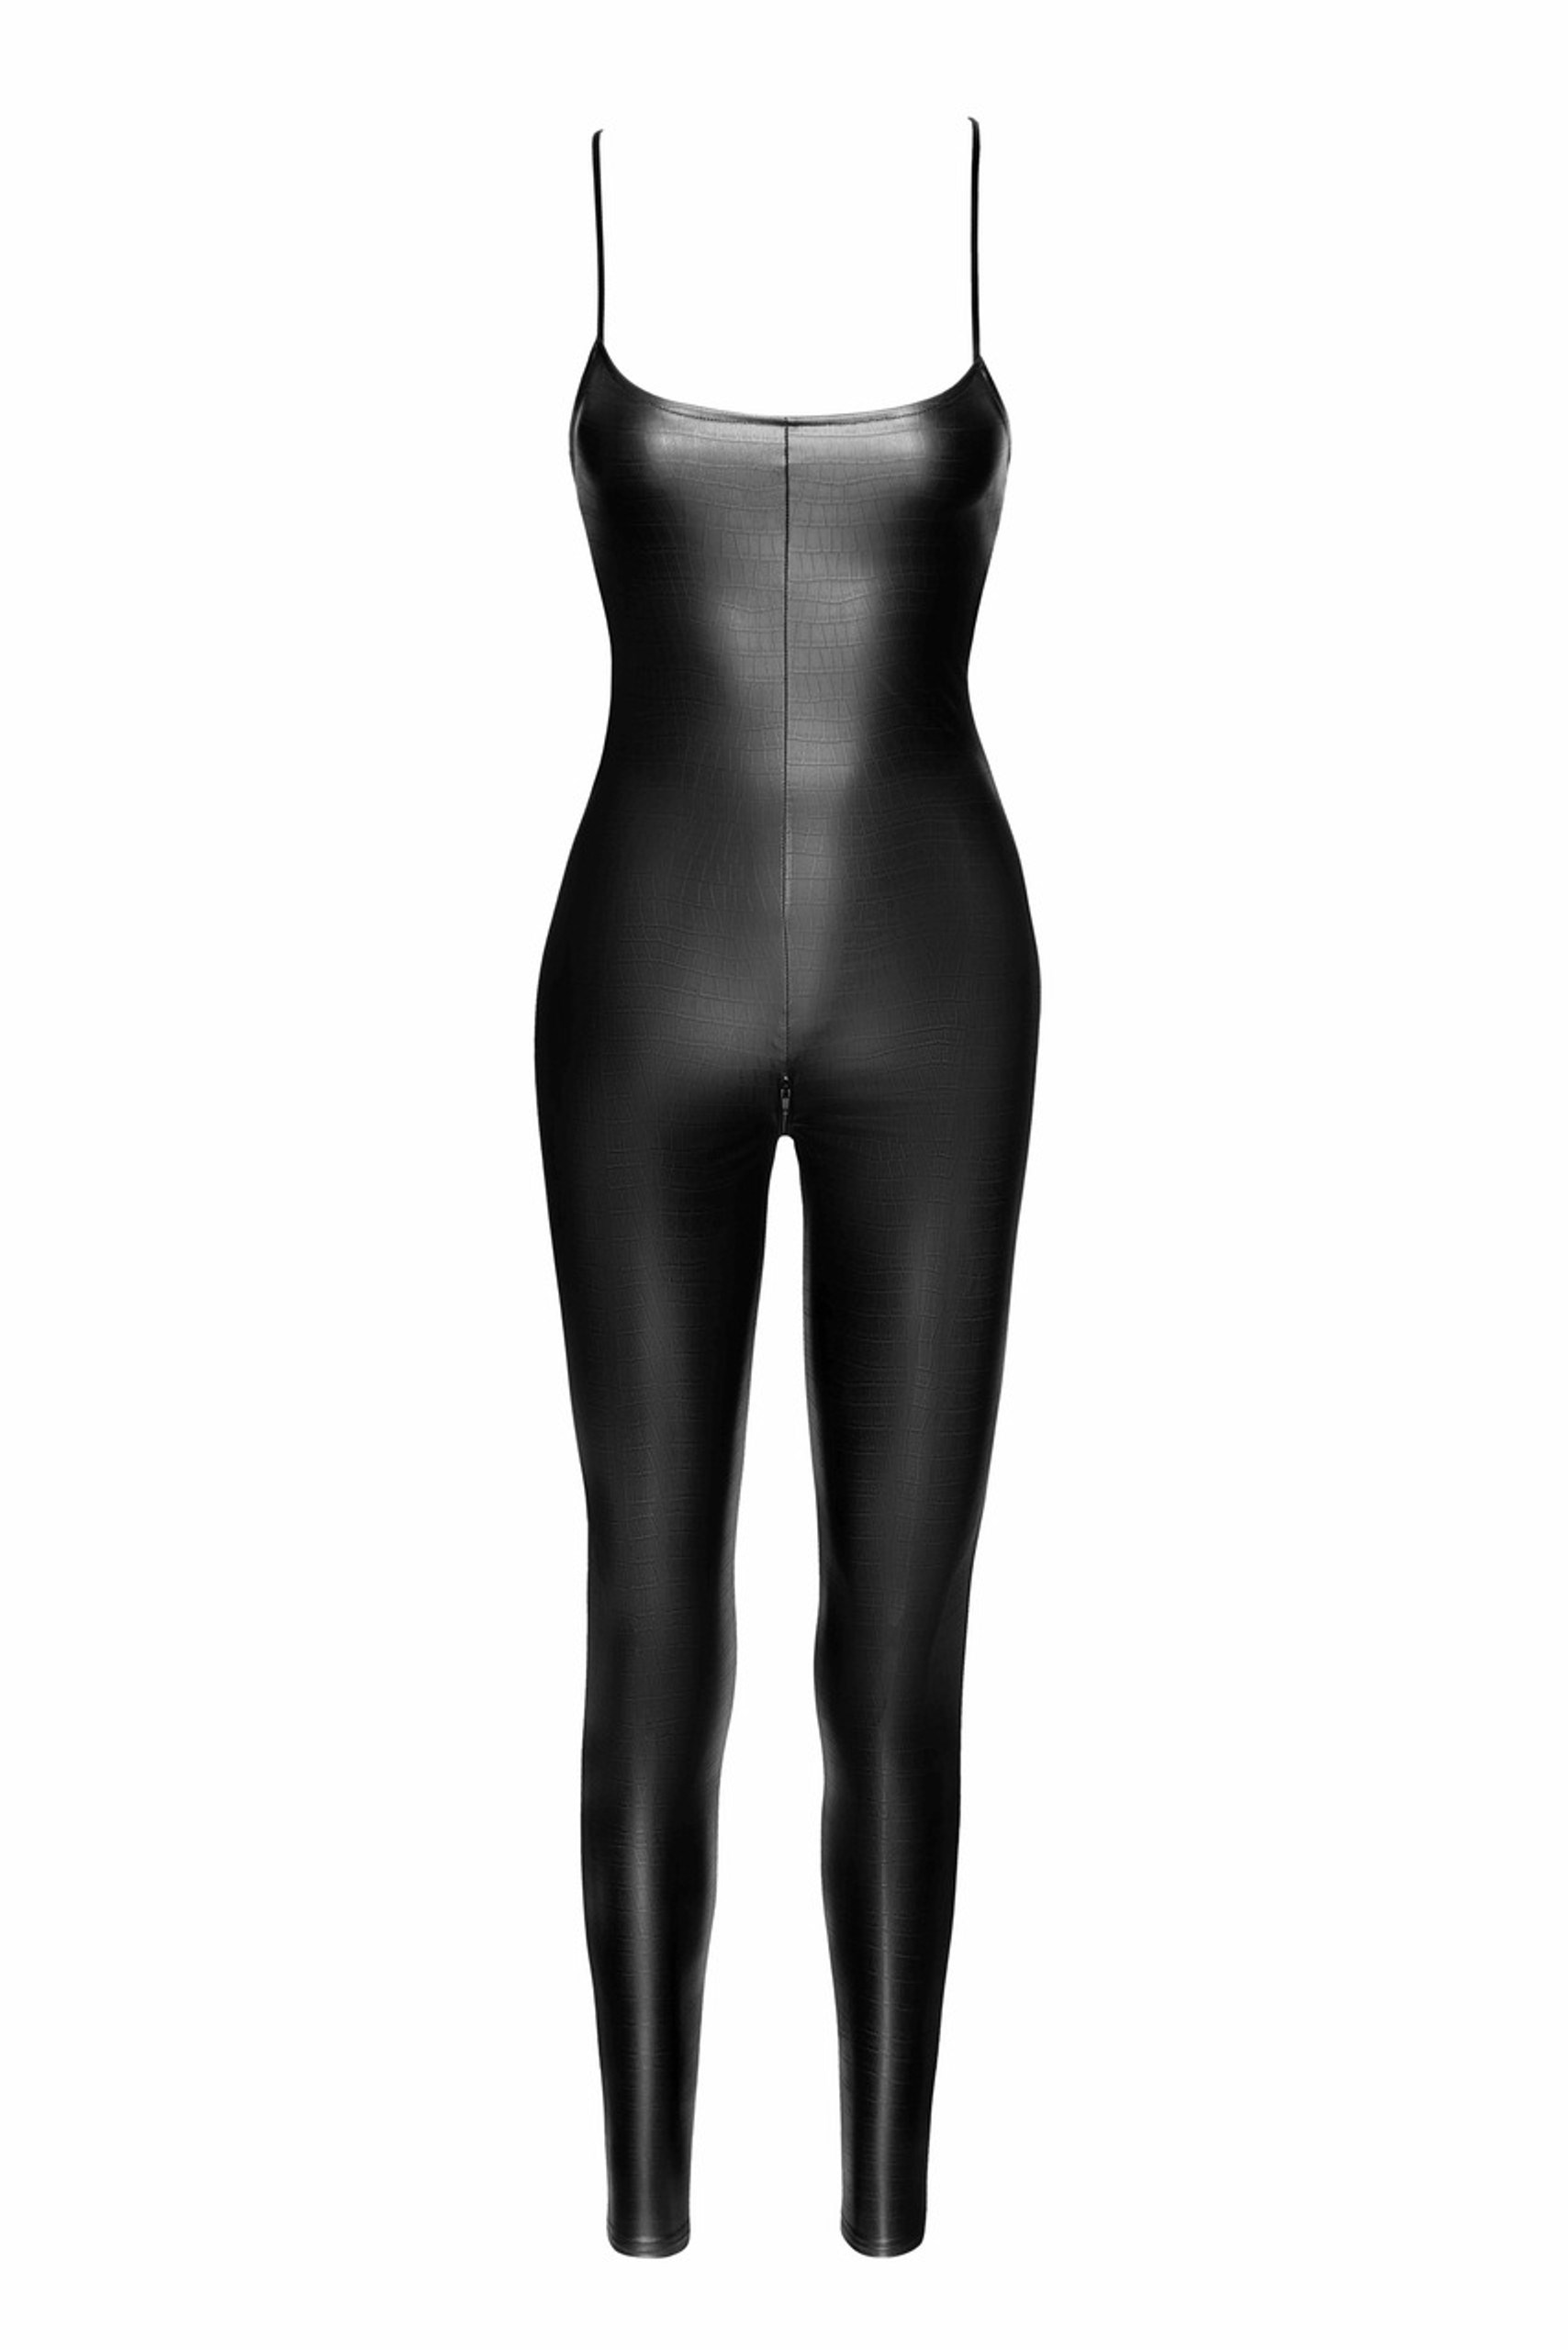 F316 Wild crocodile printed wetlook catsuit with lace up back